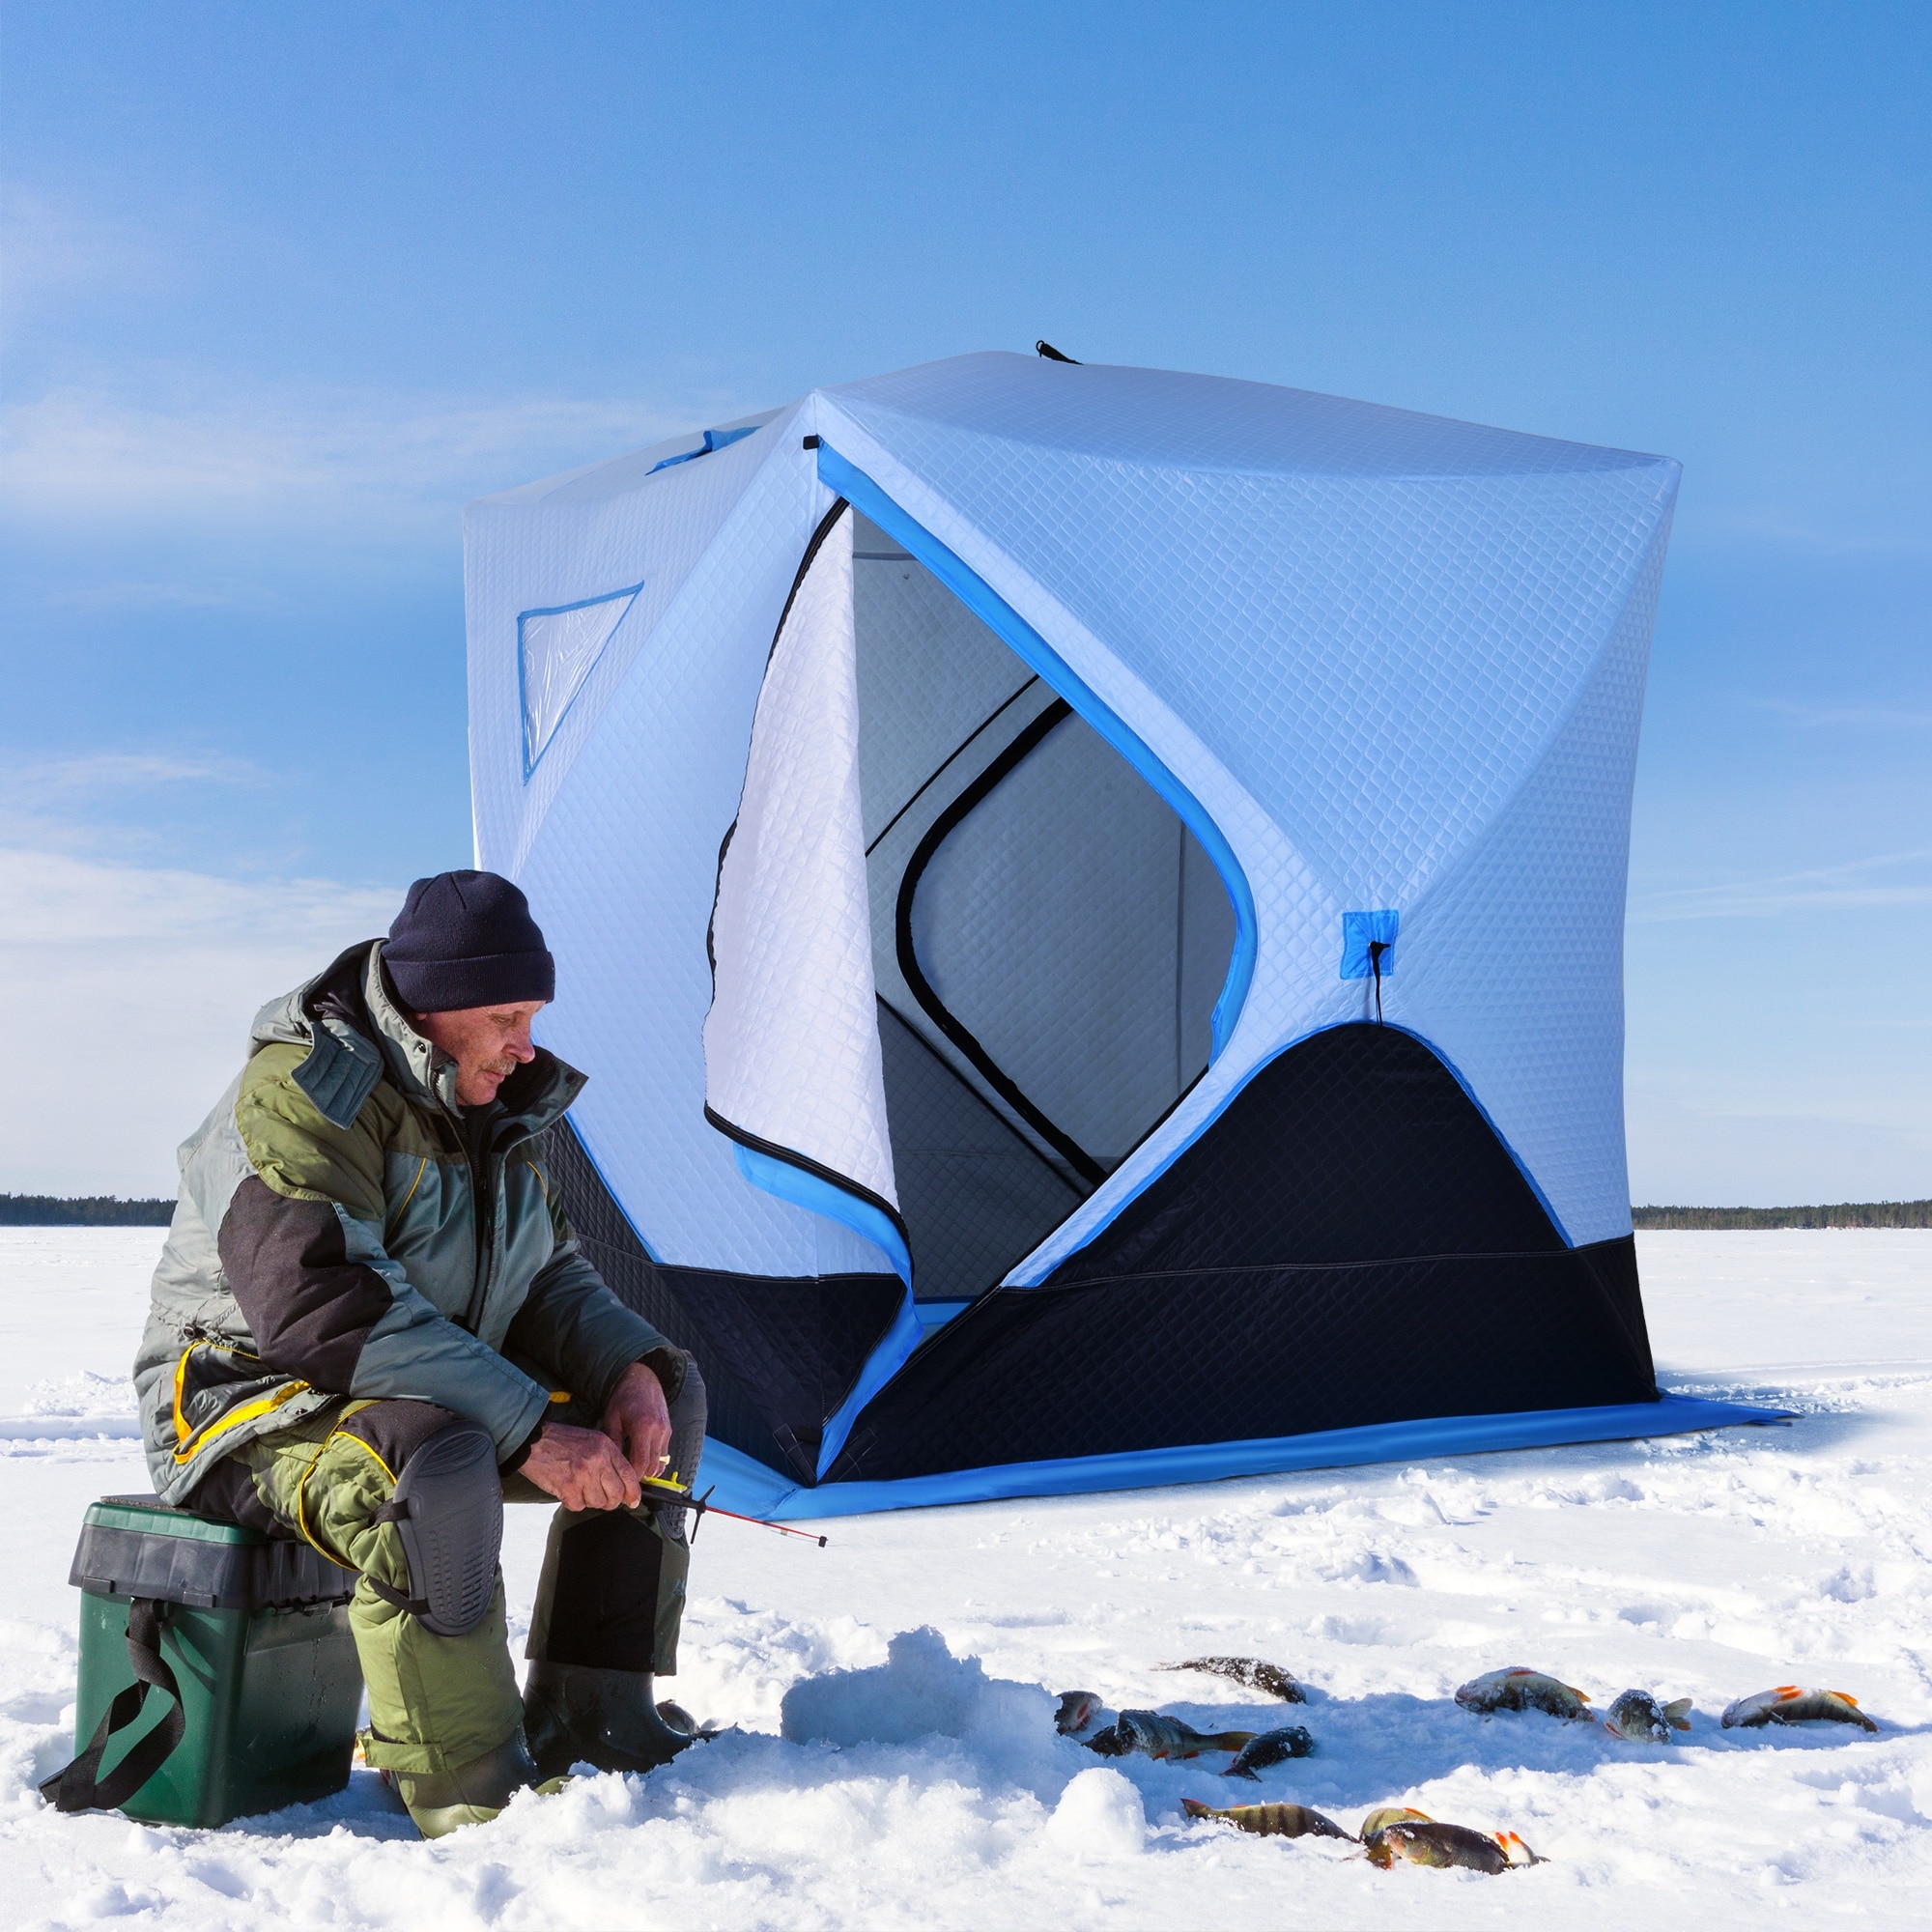 https://ak1.ostkcdn.com/images/products/is/images/direct/eebe54080d5c4e4996d5f551aa5bca8b731fe7be/Outsunny-Portable-2-4Person-Pop-up-Ice-Shelter-Insulated-Ice-Fishing-Tent-with-Ventilation-Windows-and-Carry-Bag.jpg